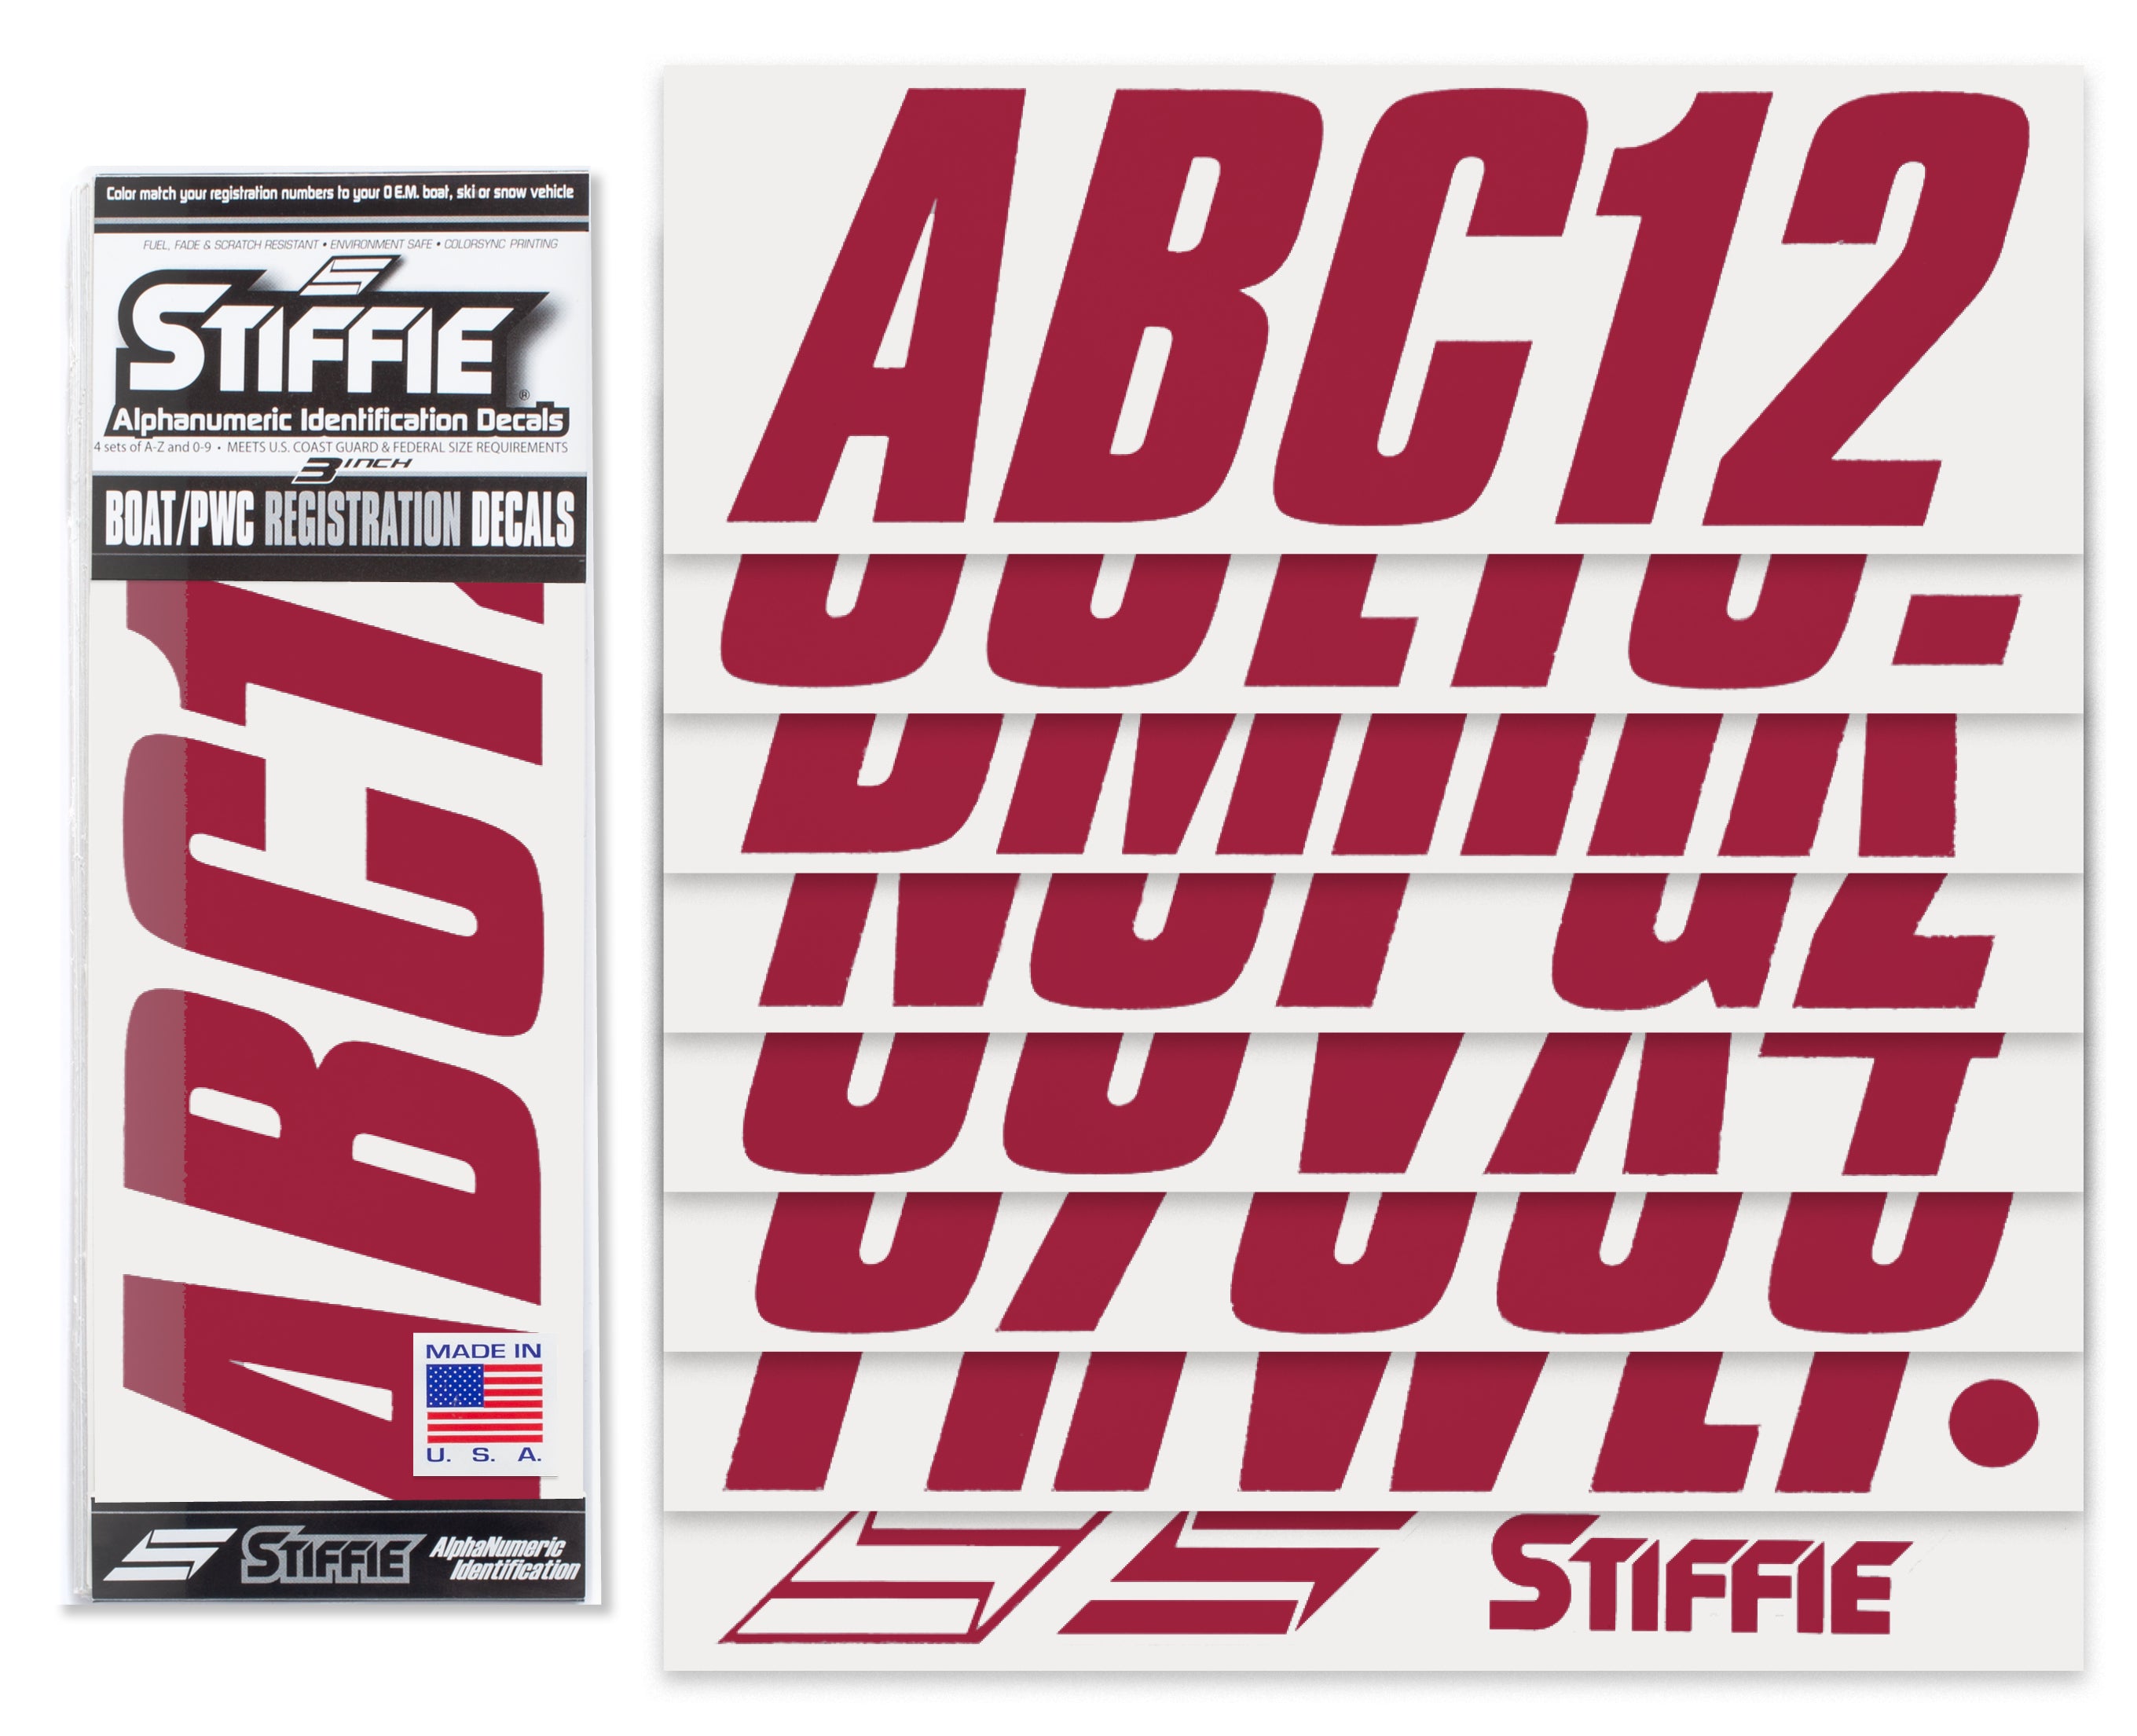 STIFFIE Shift Burgundy 3" ID Kit Alpha-Numeric Registration Identification Numbers Stickers Decals for Boats & Personal Watercraft